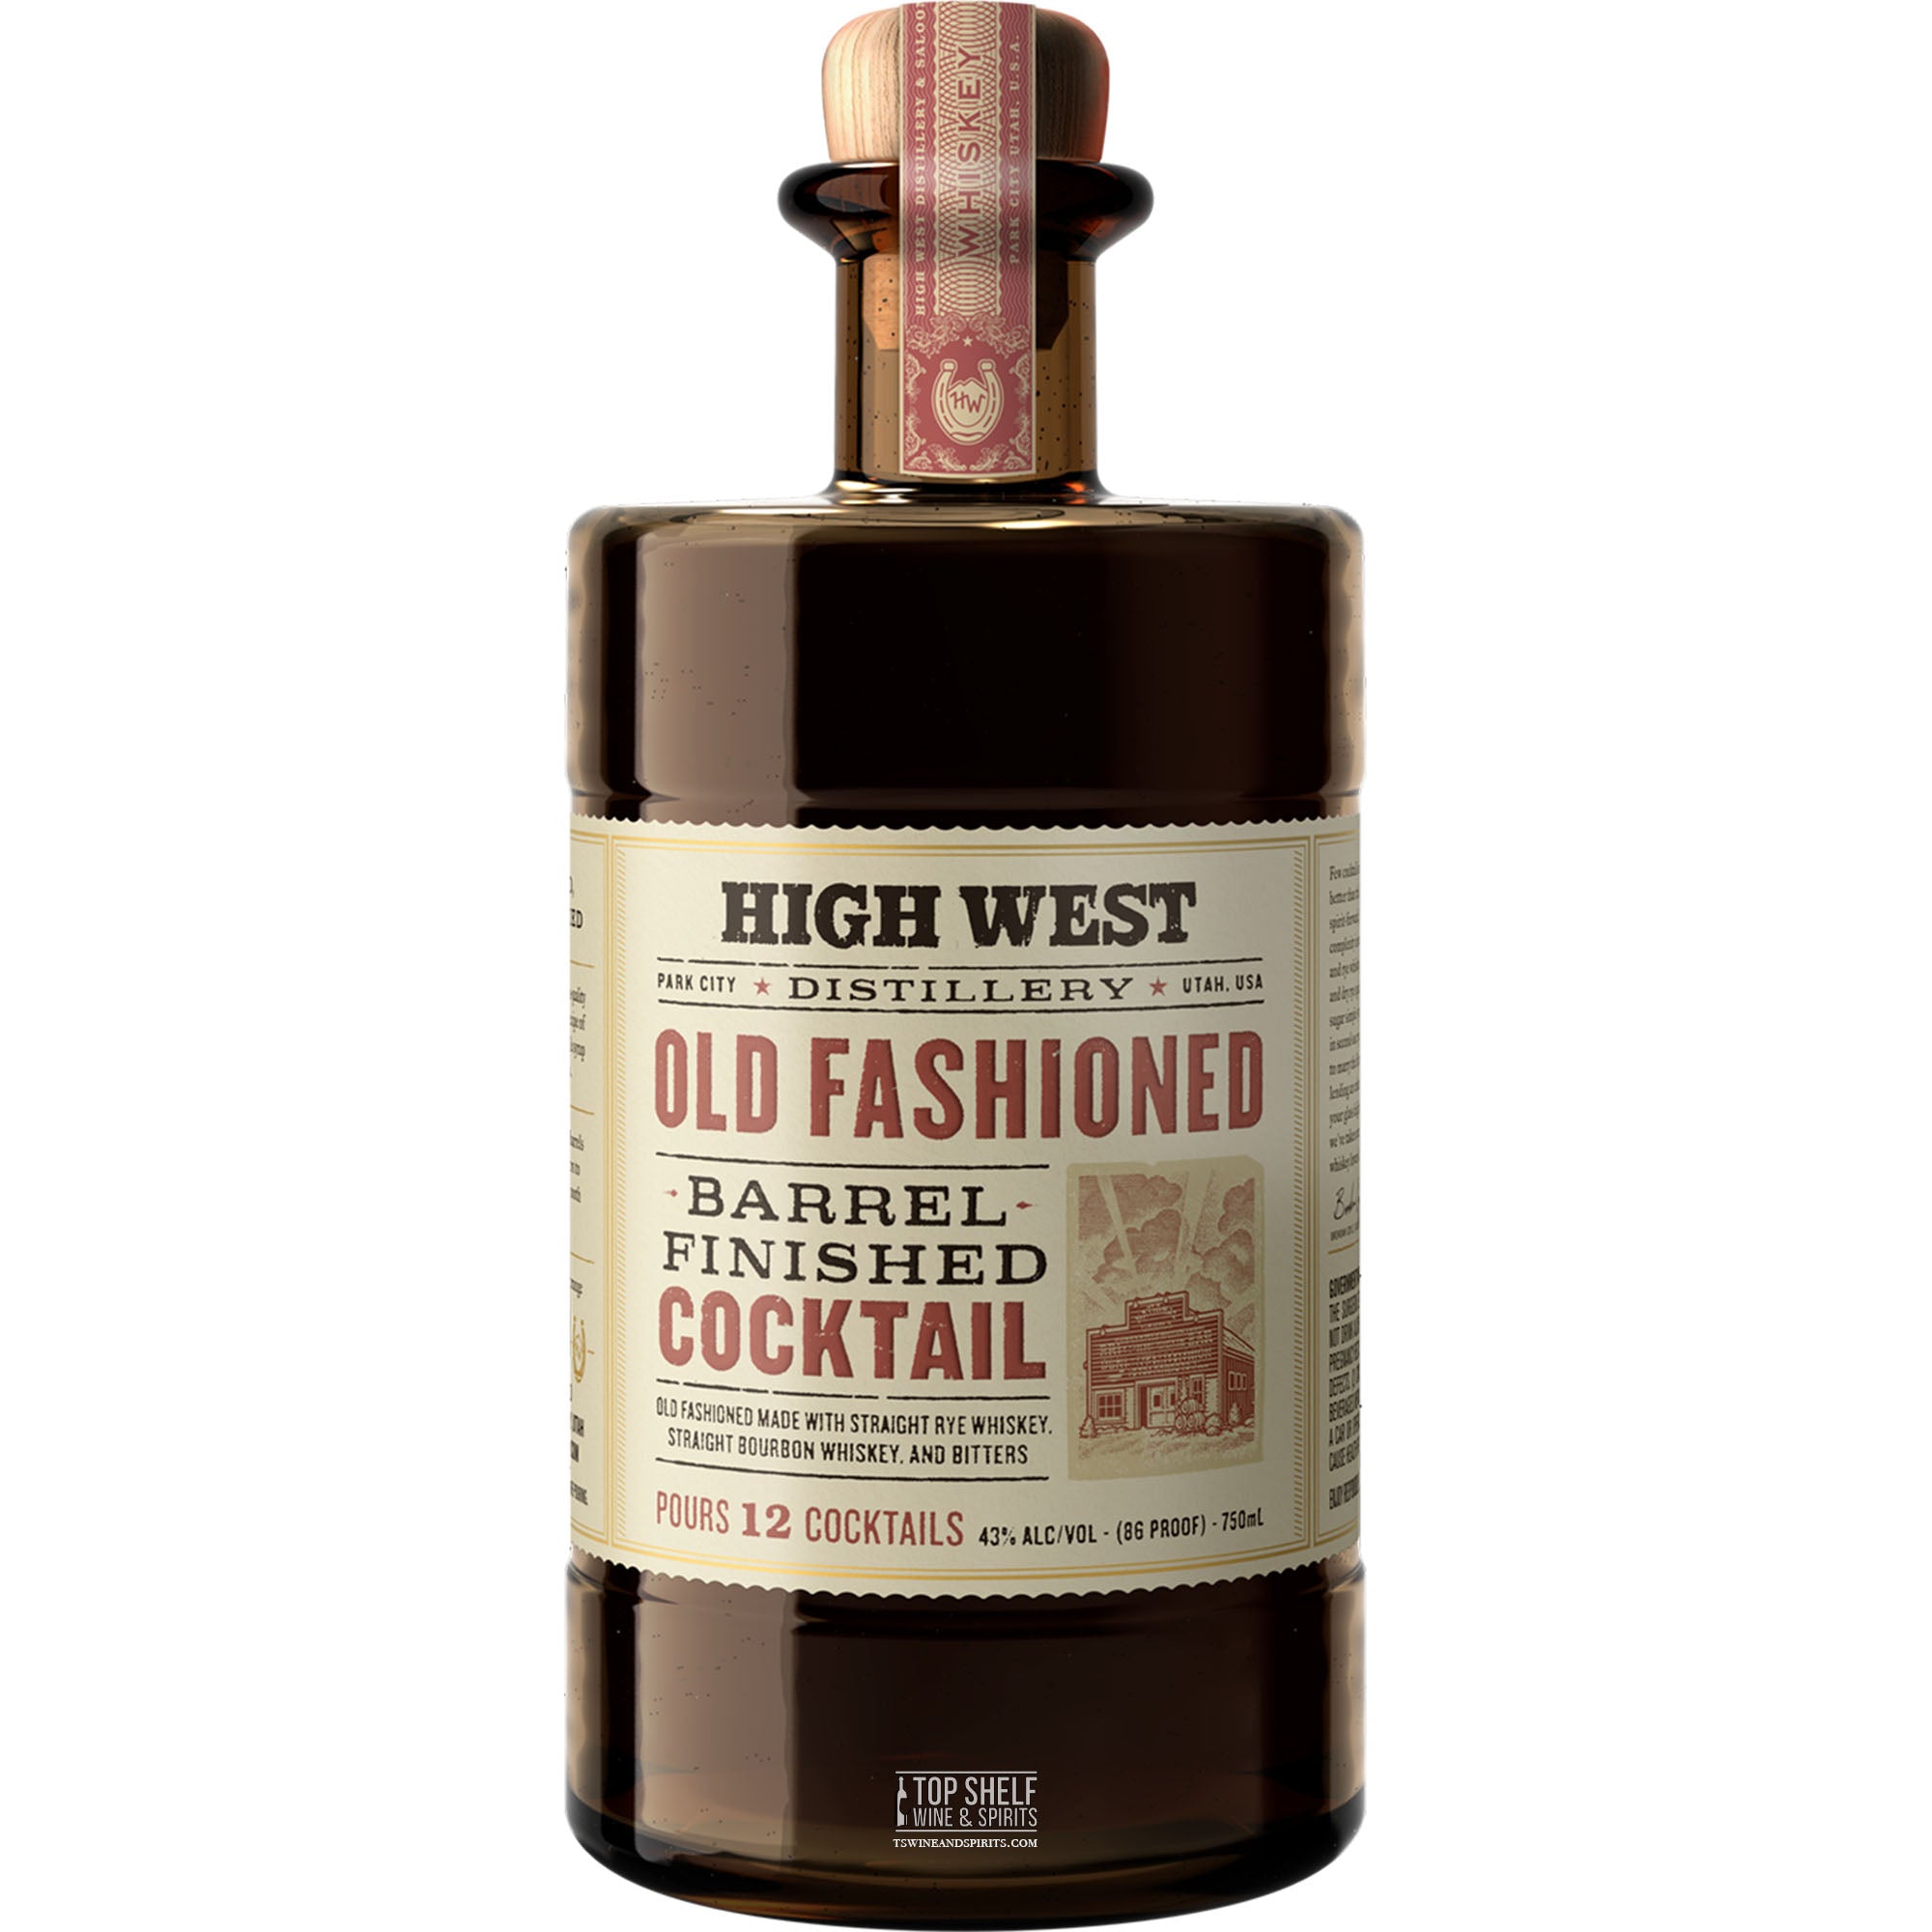 High West Barrel Aged Old Fashioned Cocktail 750mL